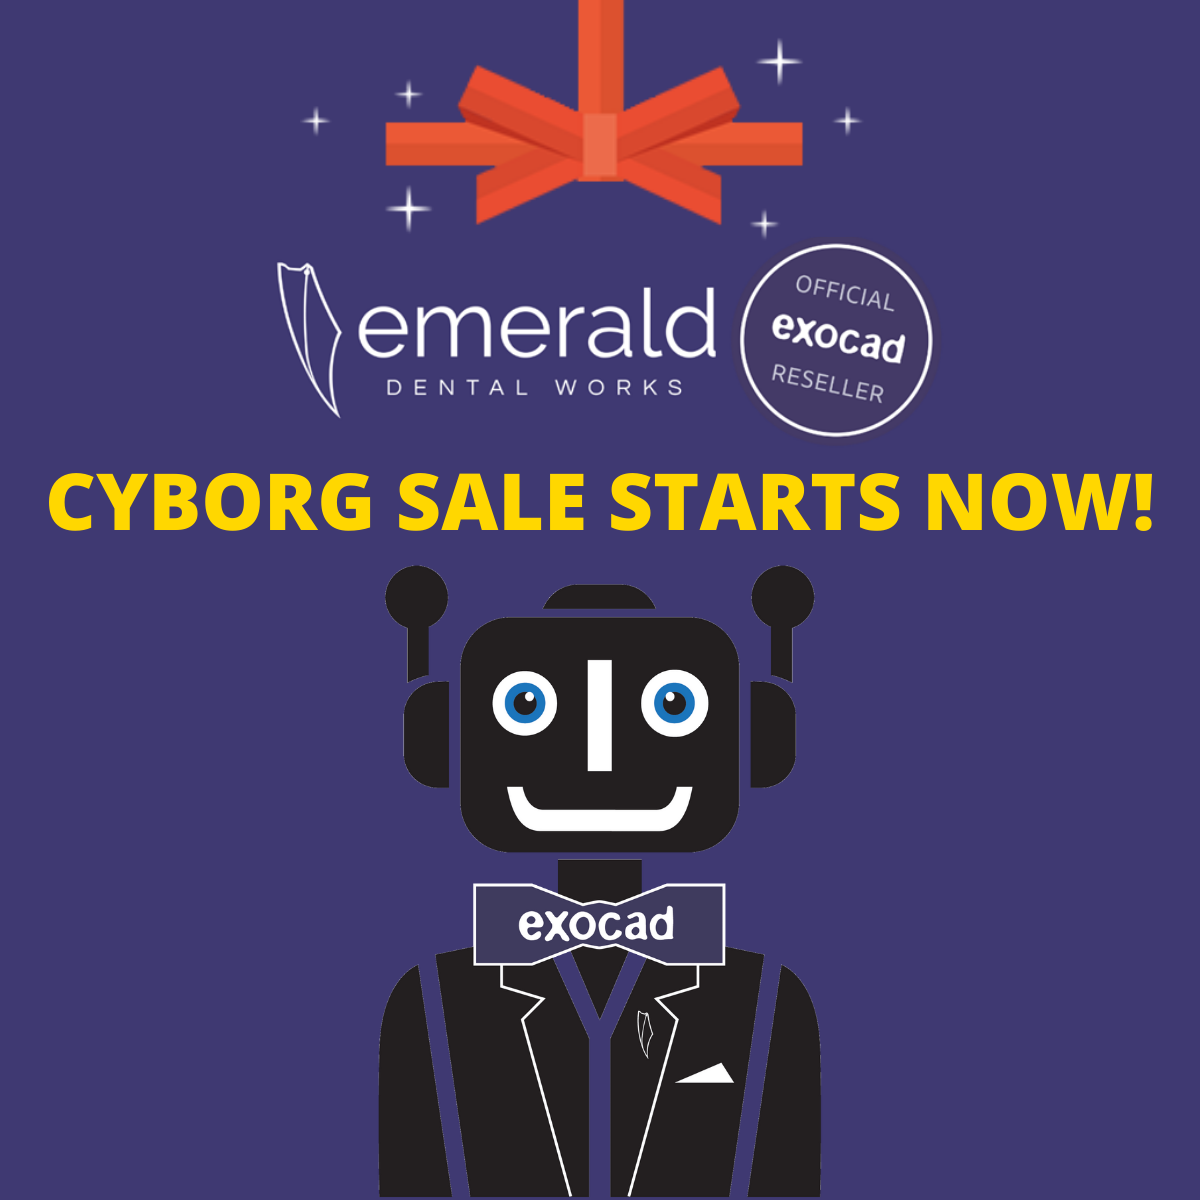 Cyborg Sale of Exocad Exclusively from Emerald Dental Works